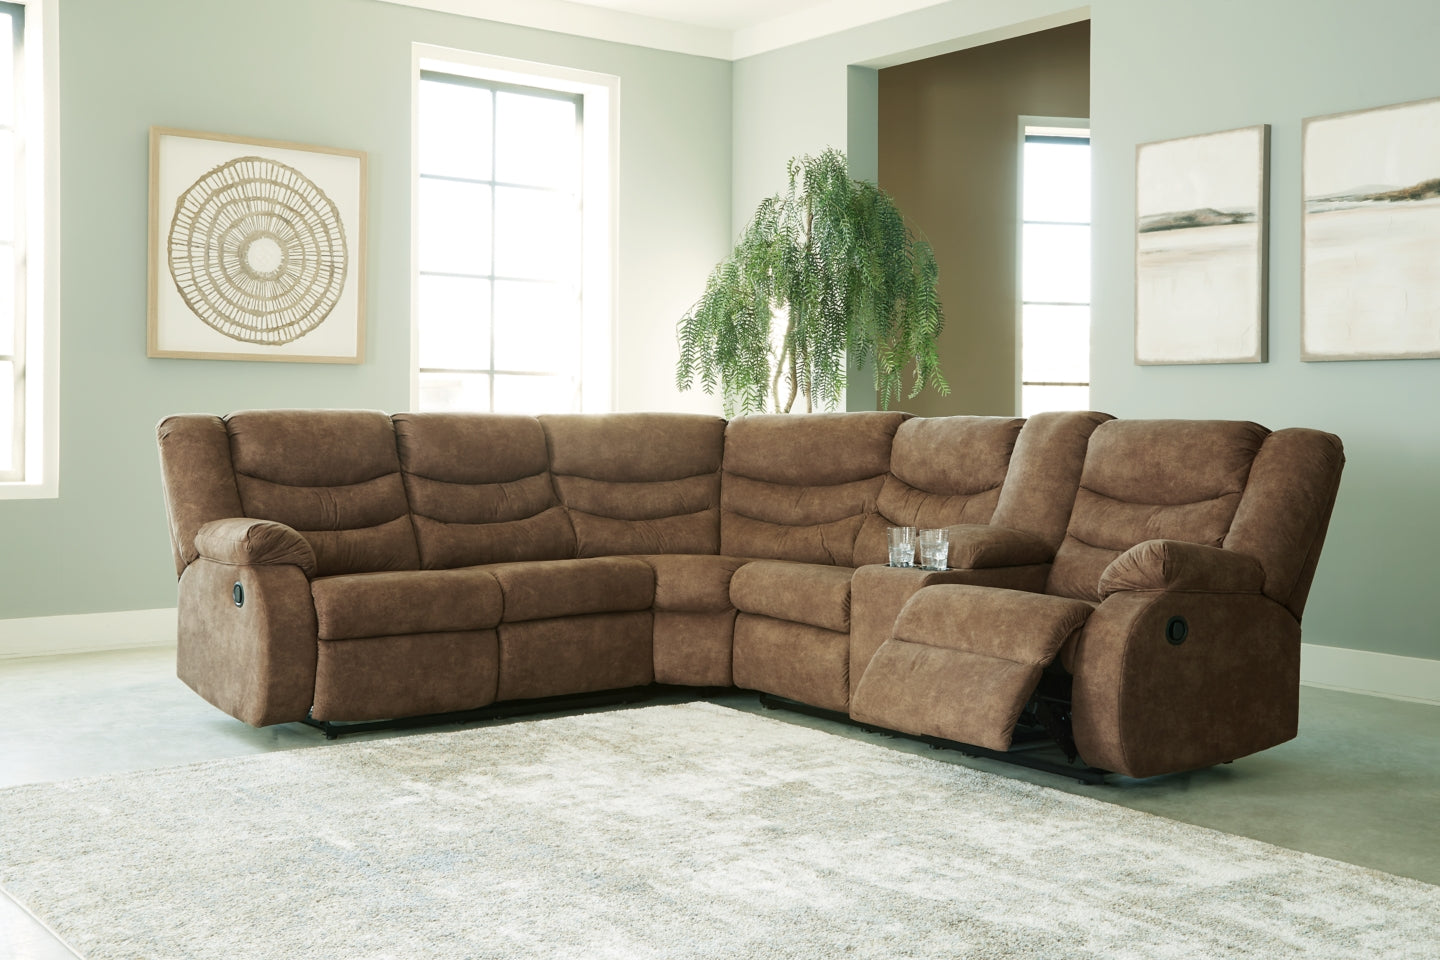 Partymate 2-Piece Reclining Sectional - furniture place usa